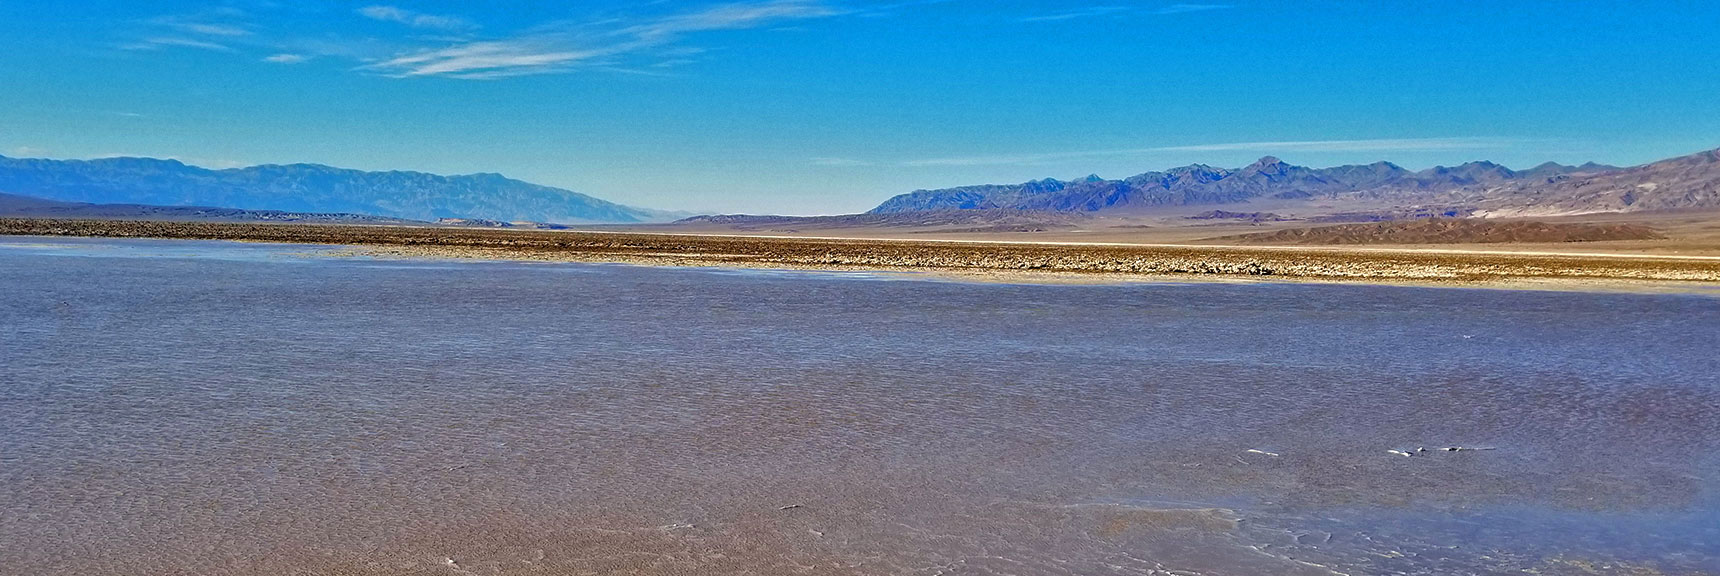 Return of Lake Manly | Death Valley National Park, California